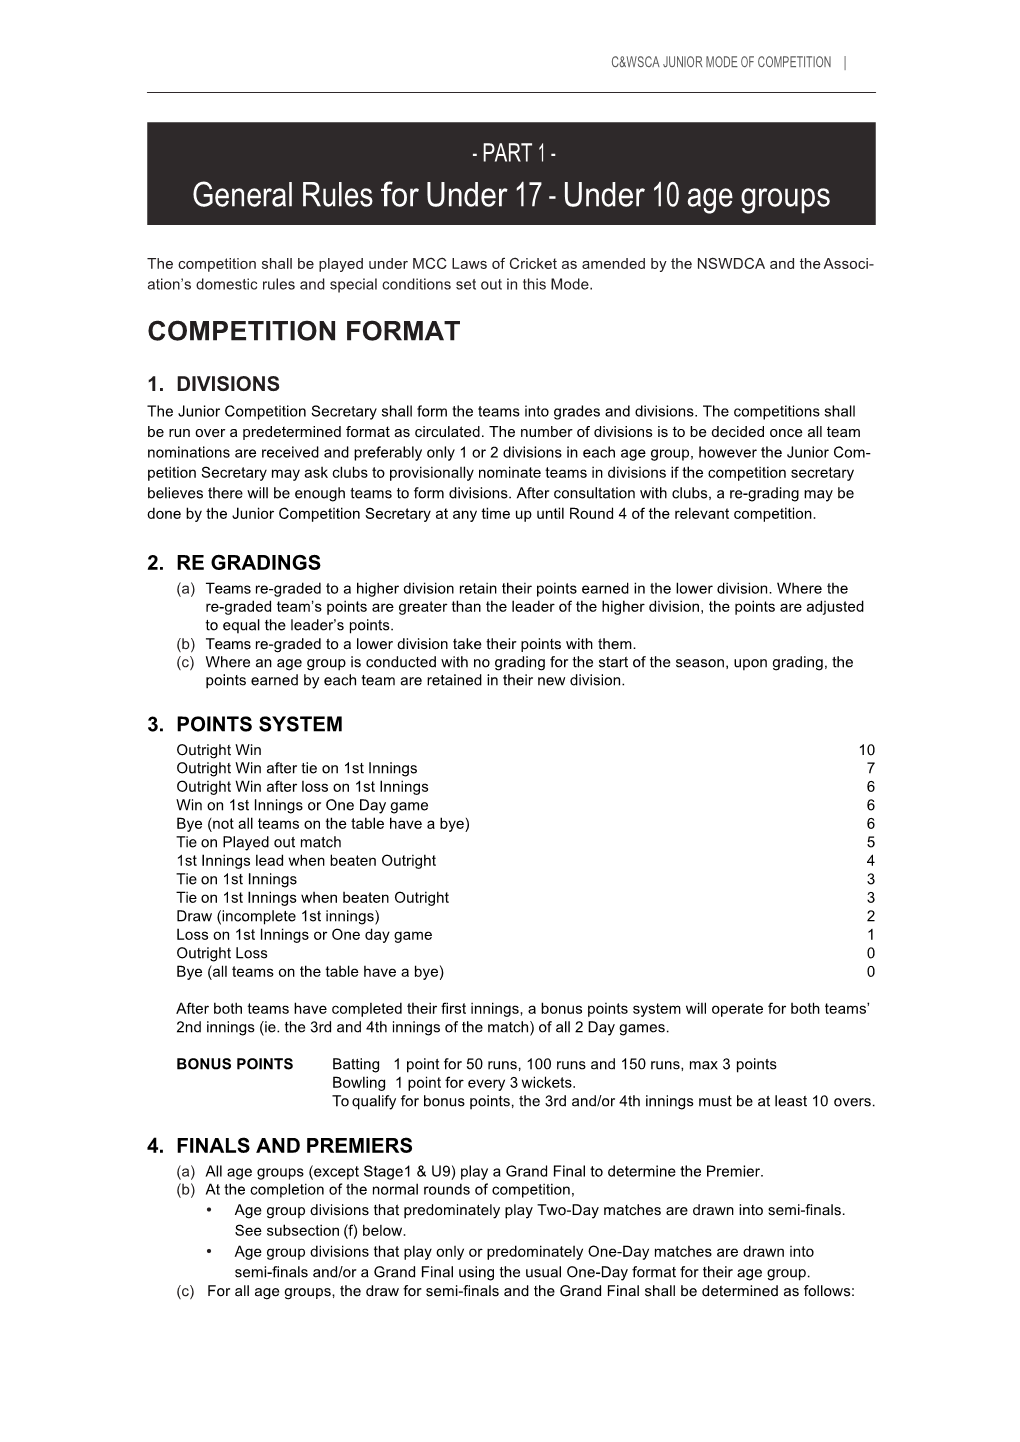 Competition Format